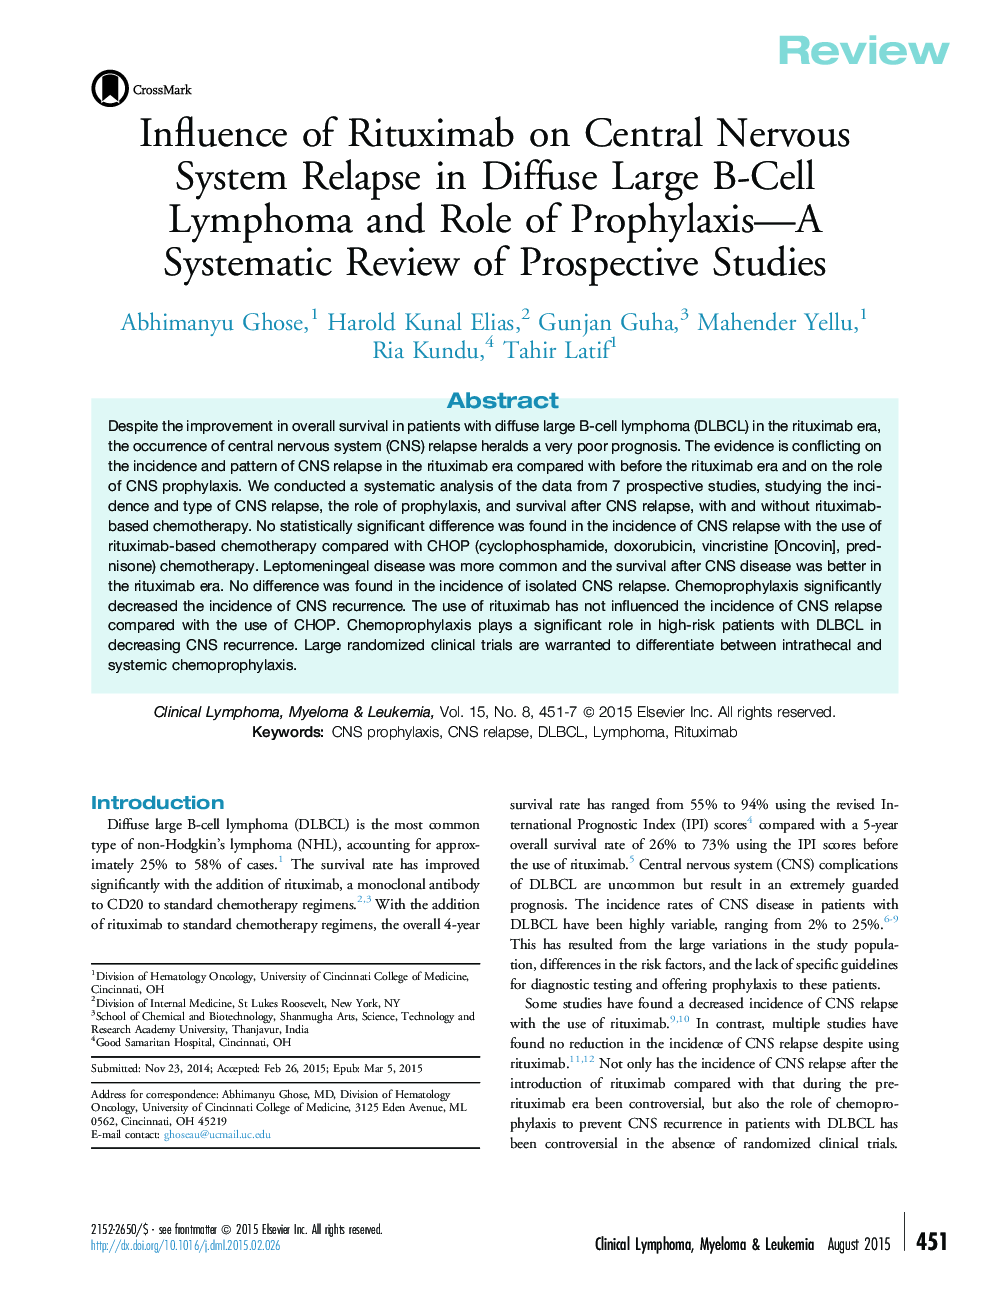 Influence of Rituximab on Central Nervous System Relapse in Diffuse Large B-Cell Lymphoma and Role of Prophylaxis—A Systematic Review of Prospective Studies